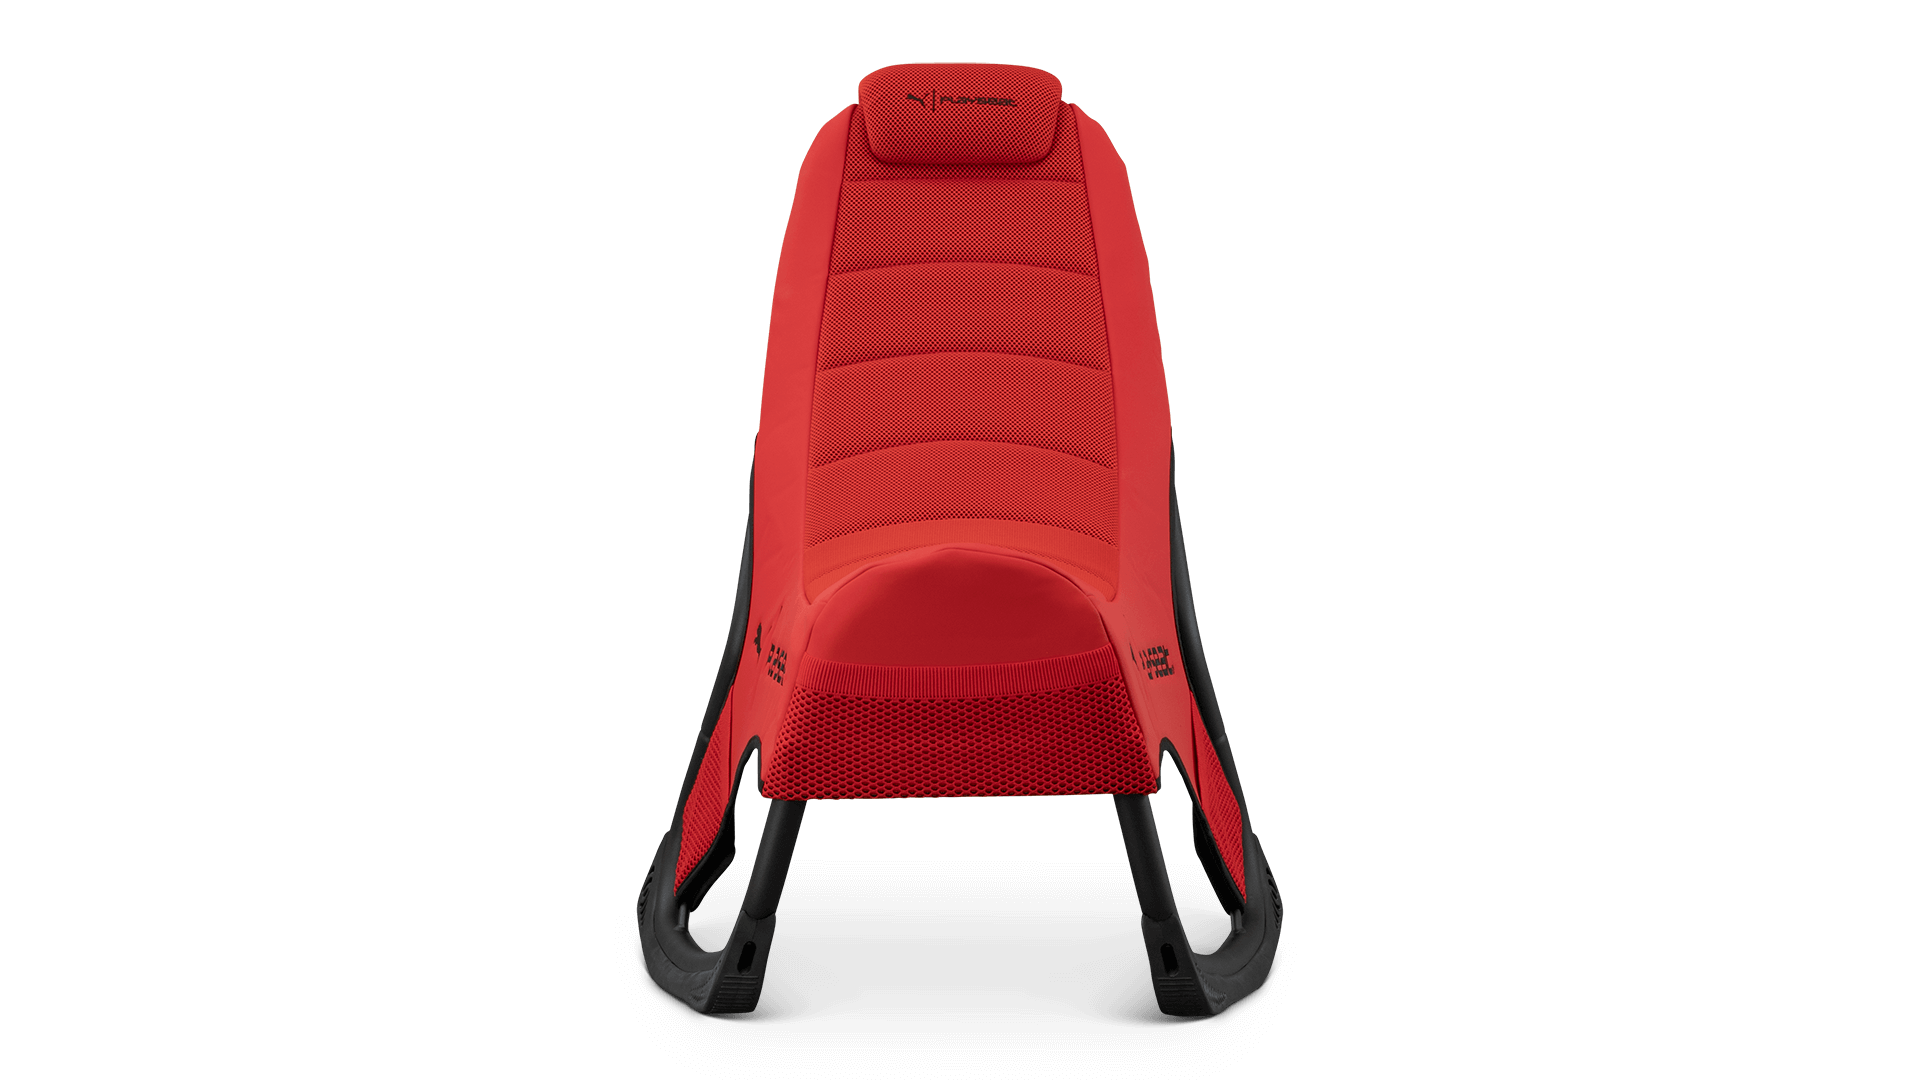 playseat-go-puma-active-red-gaming-seat-front-view-1920x1080.png